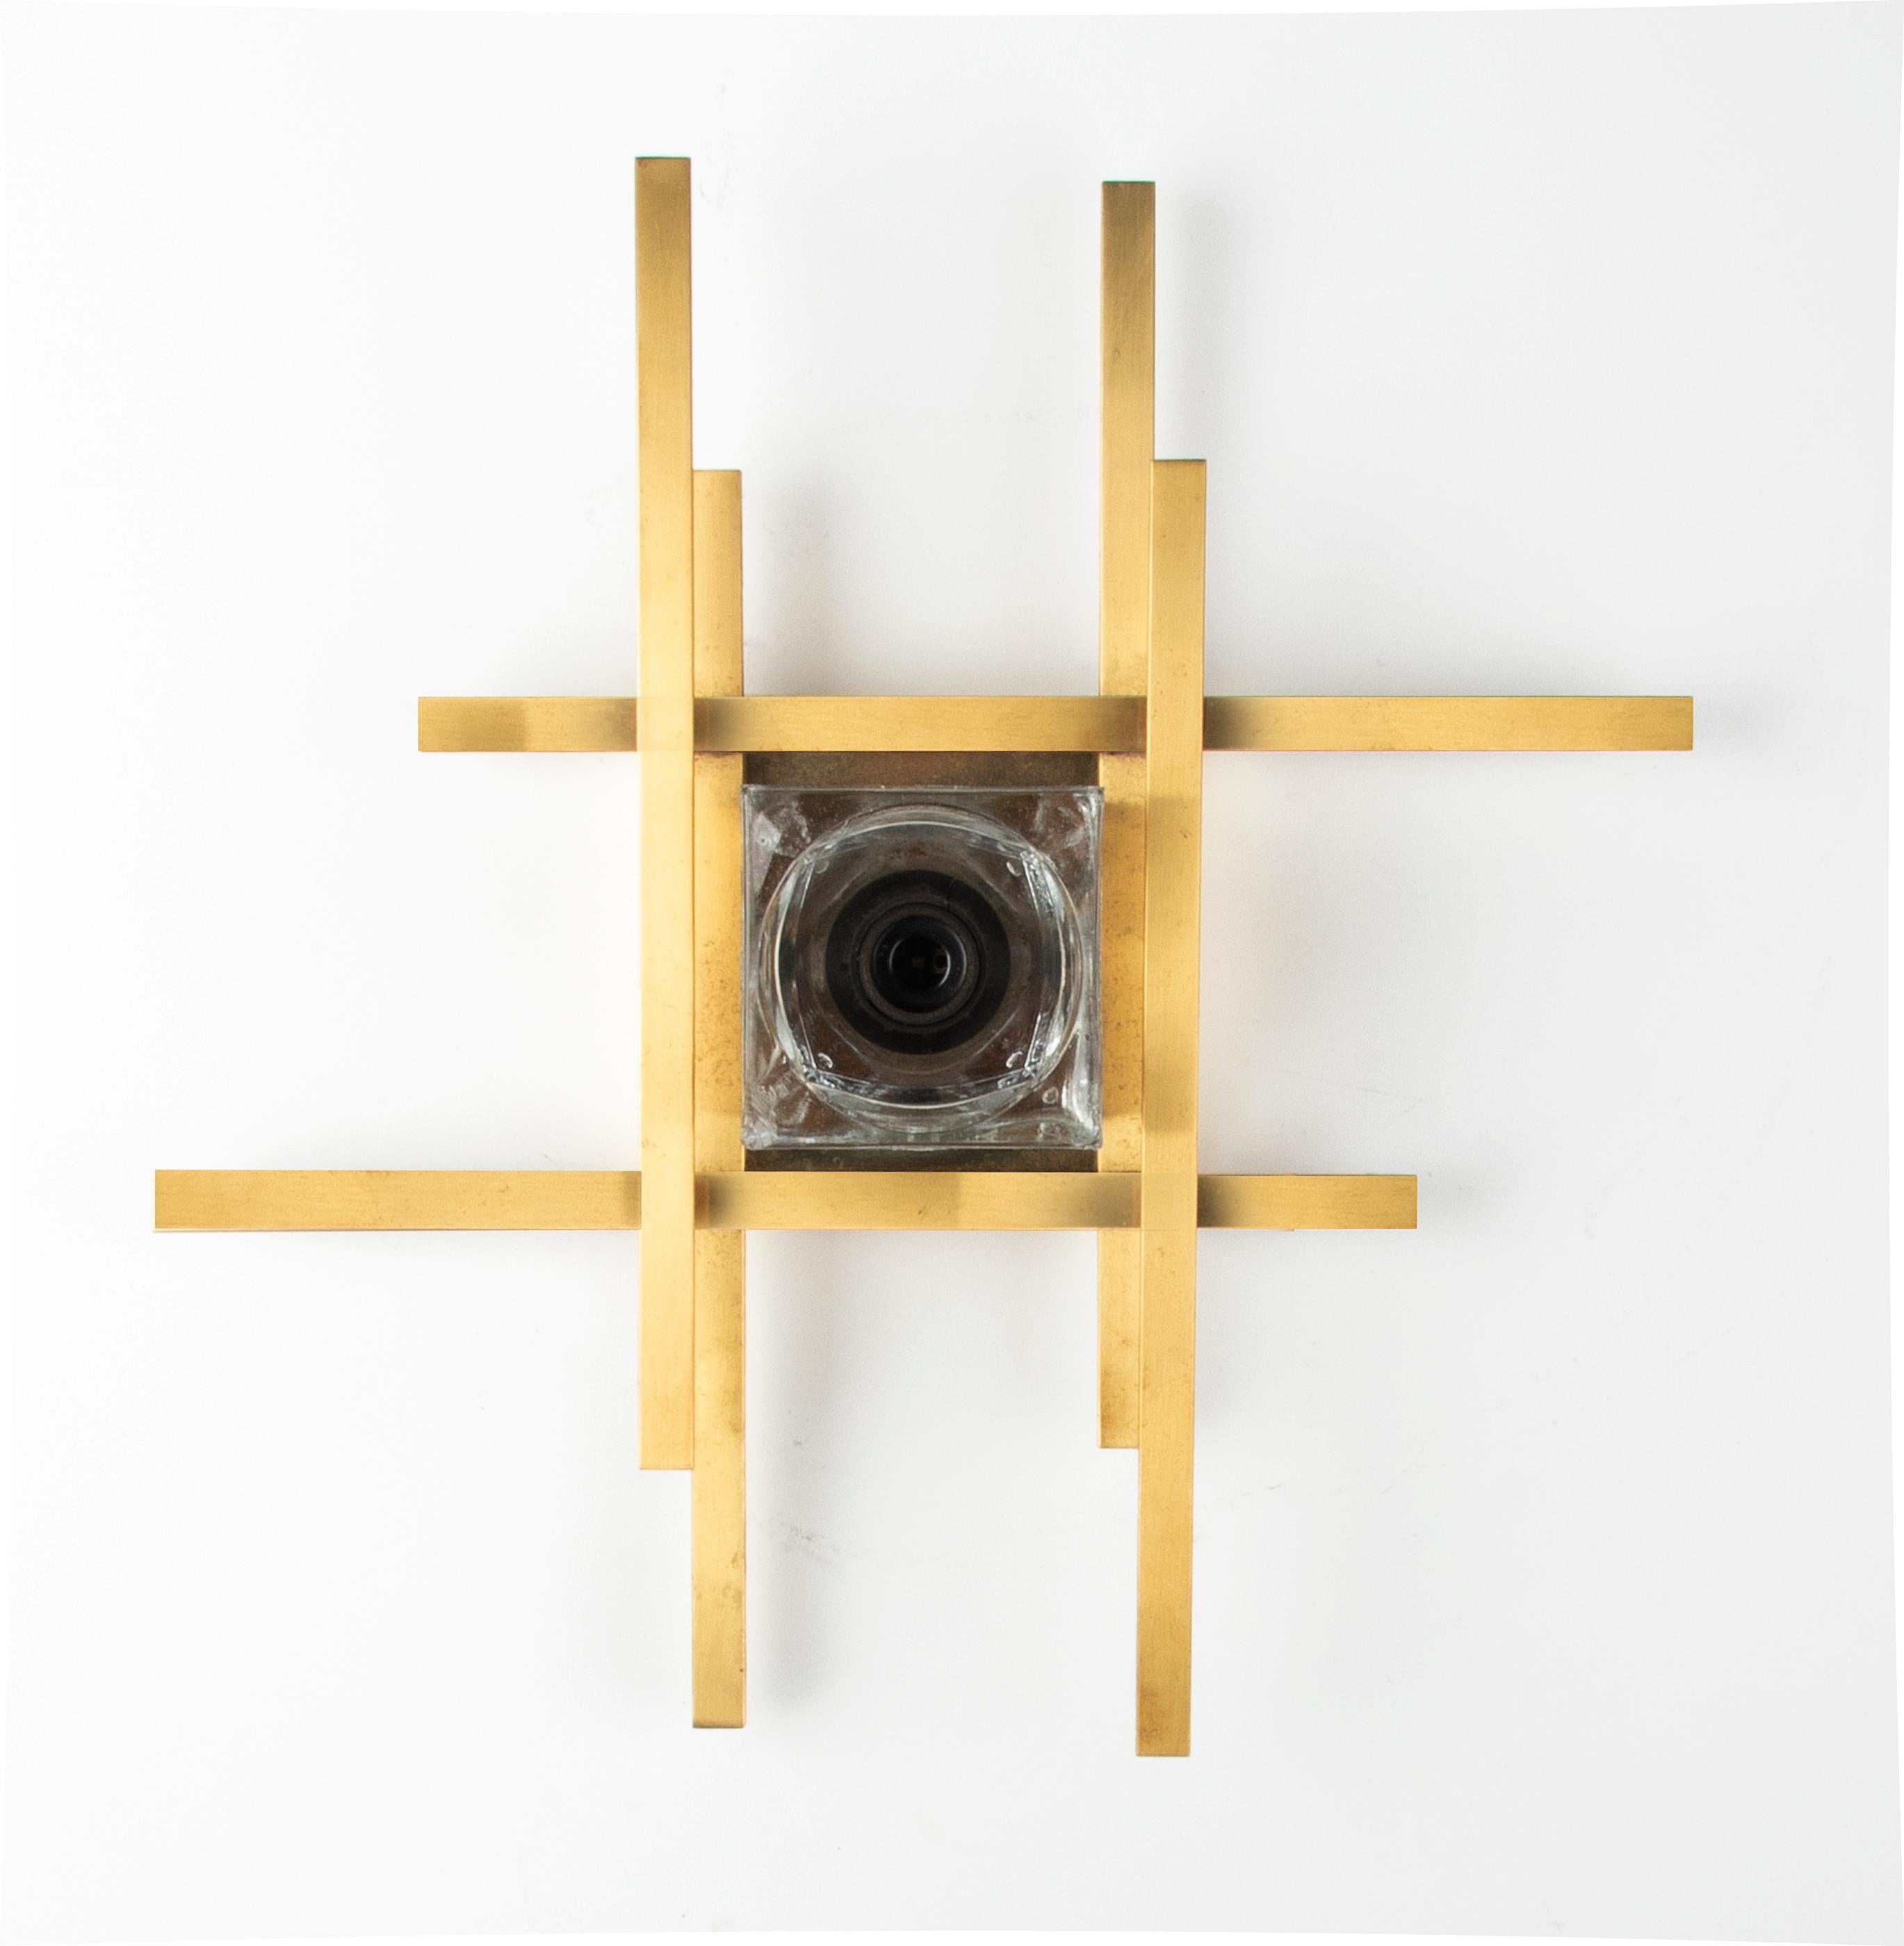 A sculptural brutalist wall light by Gaetano Sciolari, made in 1960-1970, Italy. Brass fixture, ice cubic shaped glass shade is made of Murano glass. The geometric design is a variation of Sciolari`s classic 